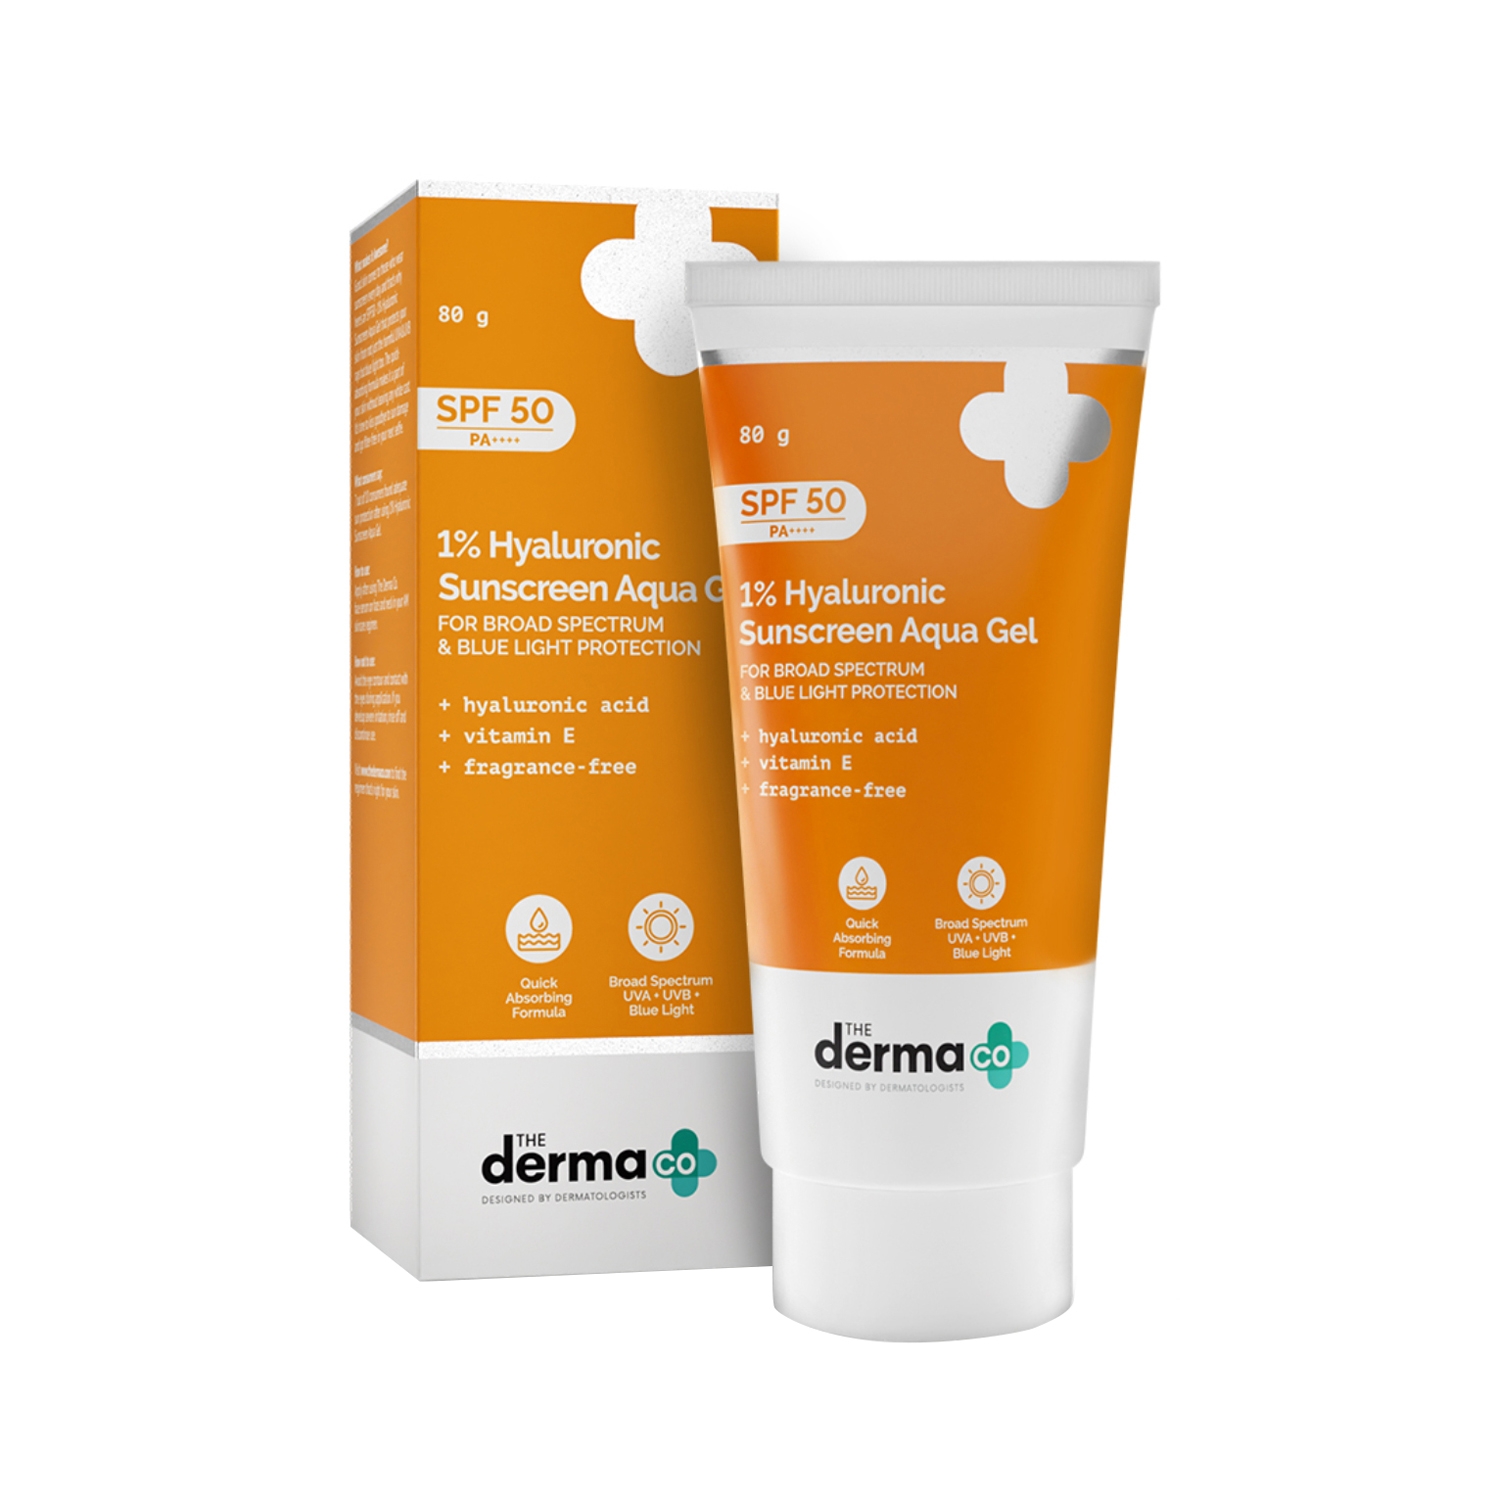 The Derma Co | The Derma Co 1% Hyaluronic Sunscreen Aqua Gel With SPF 50 PA++ (80g)